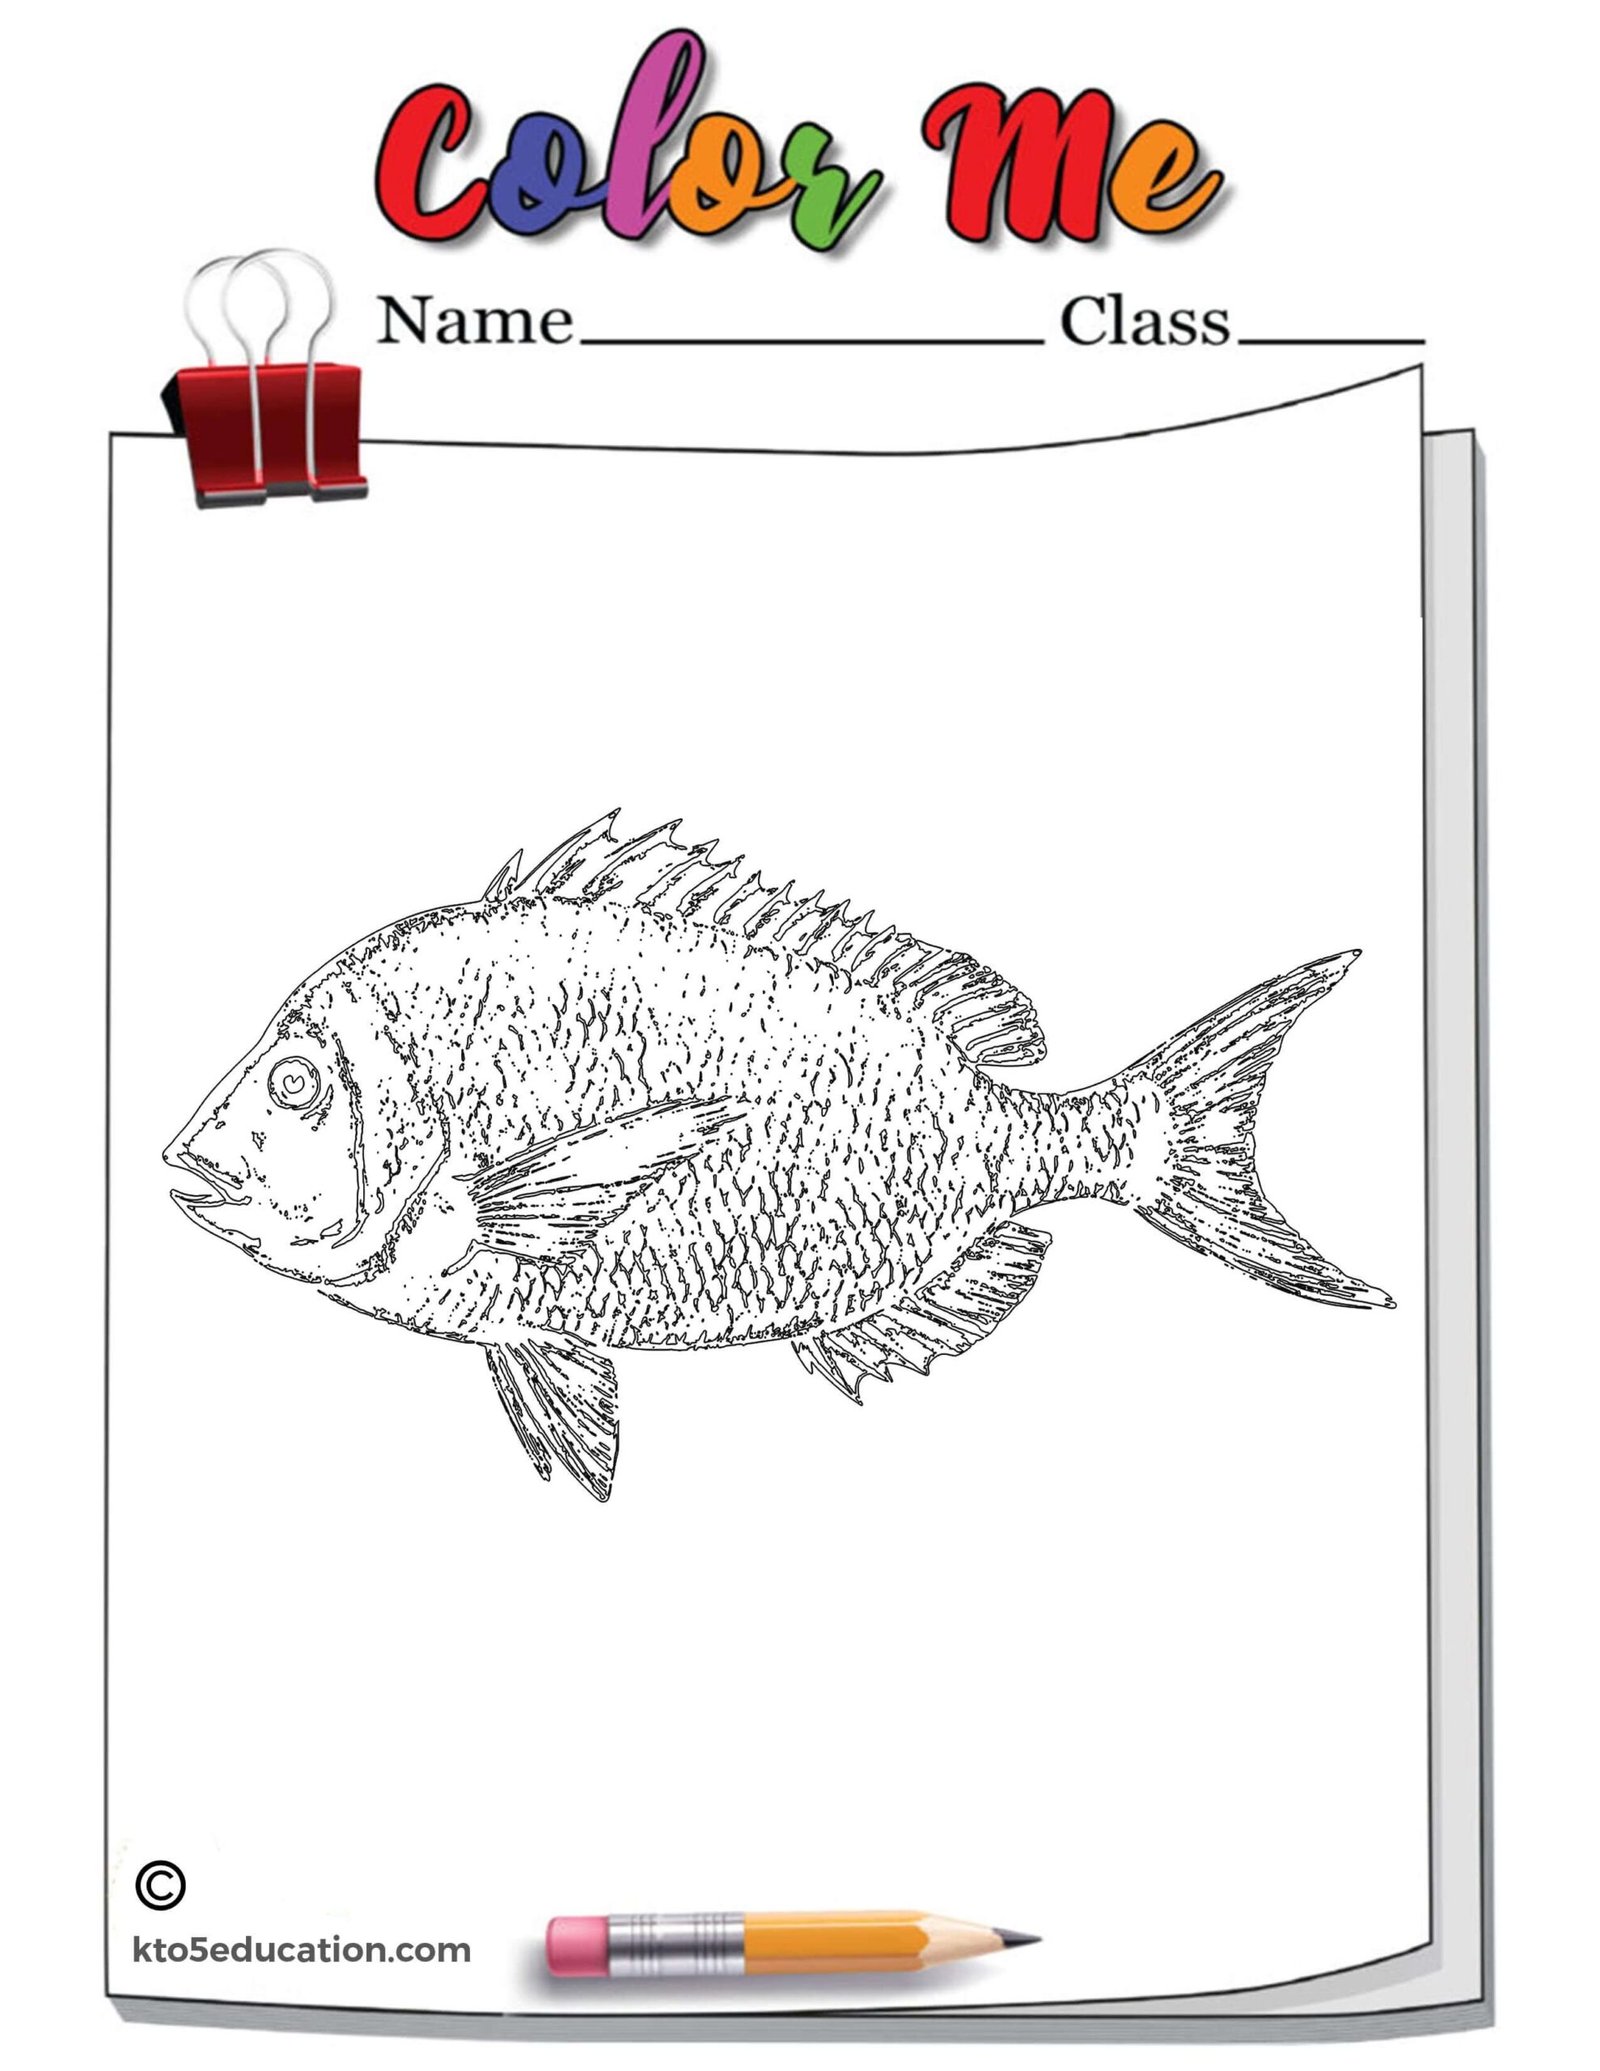 Porgy Fish Outline Coloring Page